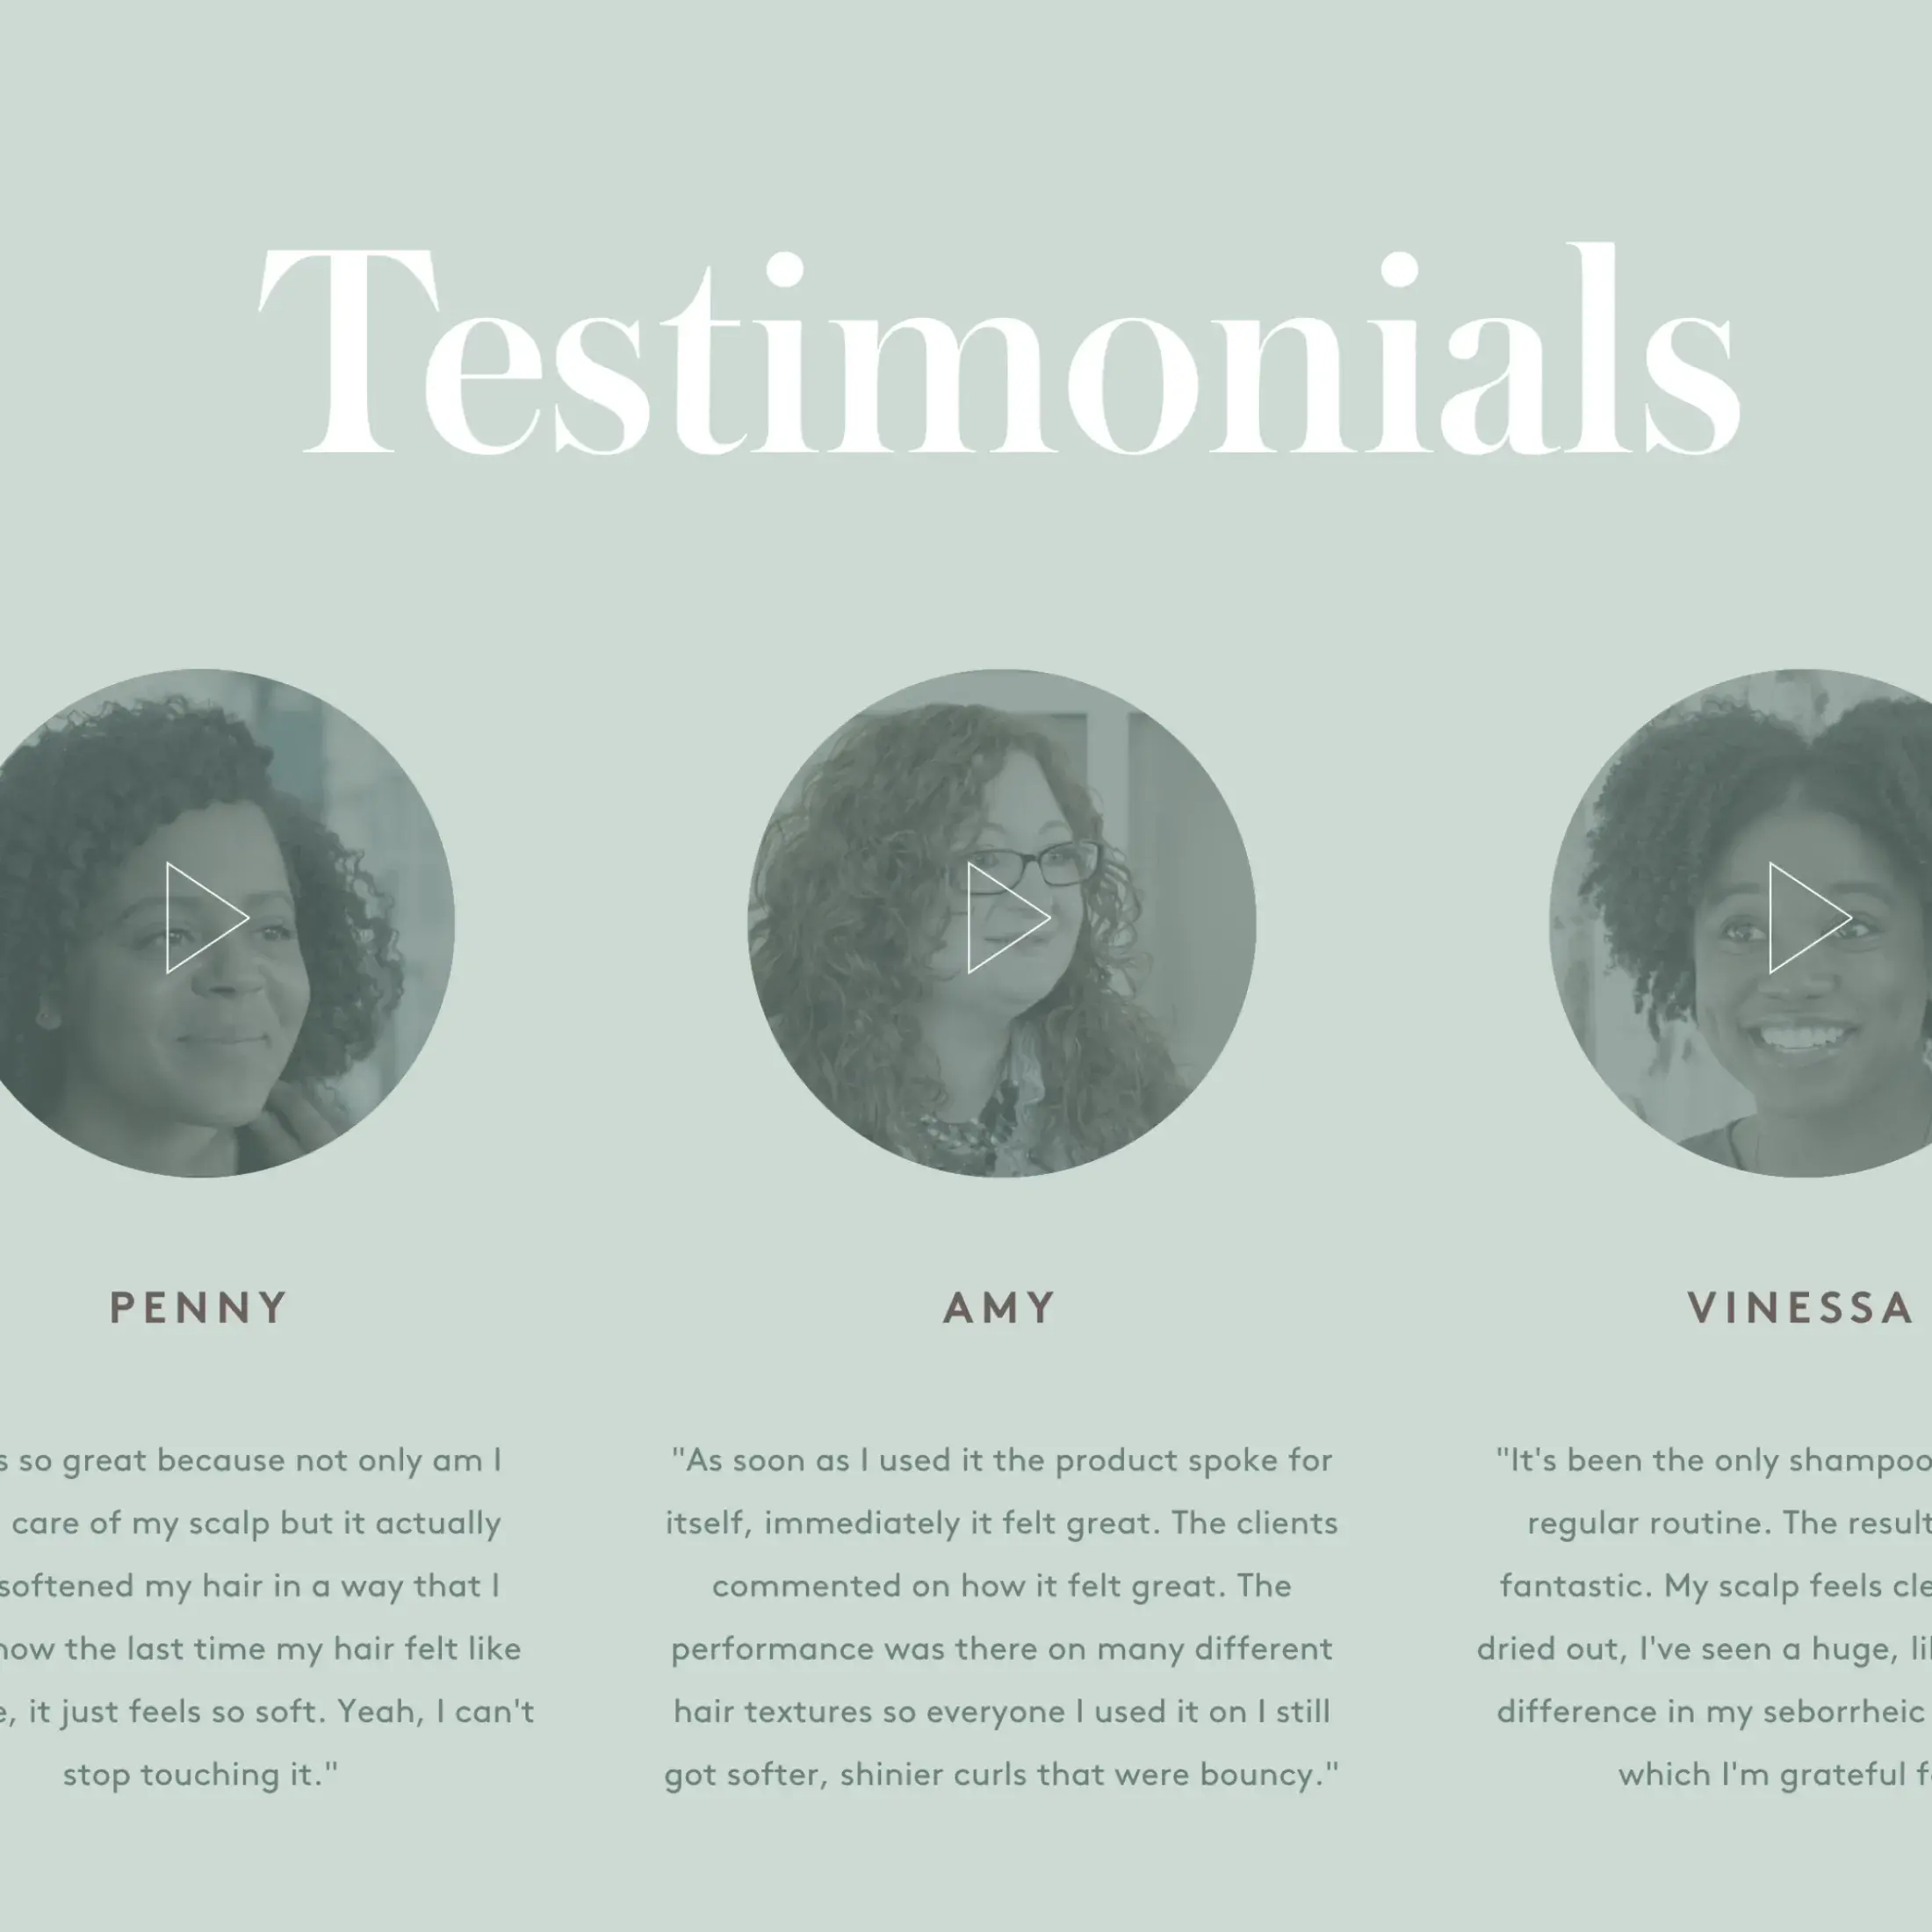 Testimonials by LivSo customers